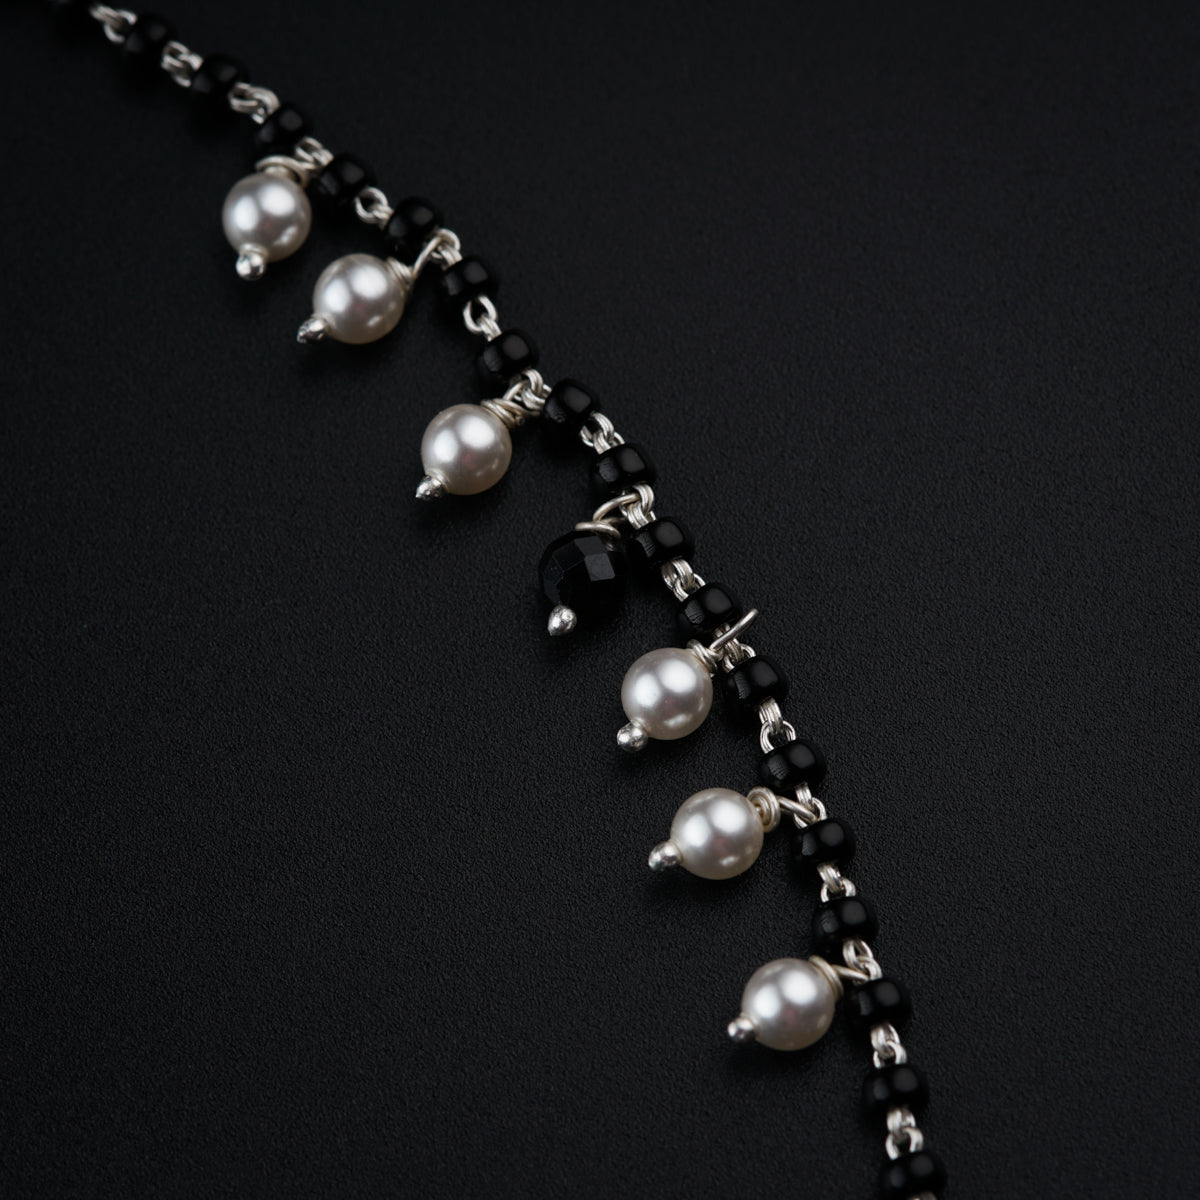 Mangalsutra Bracelet with Pearl